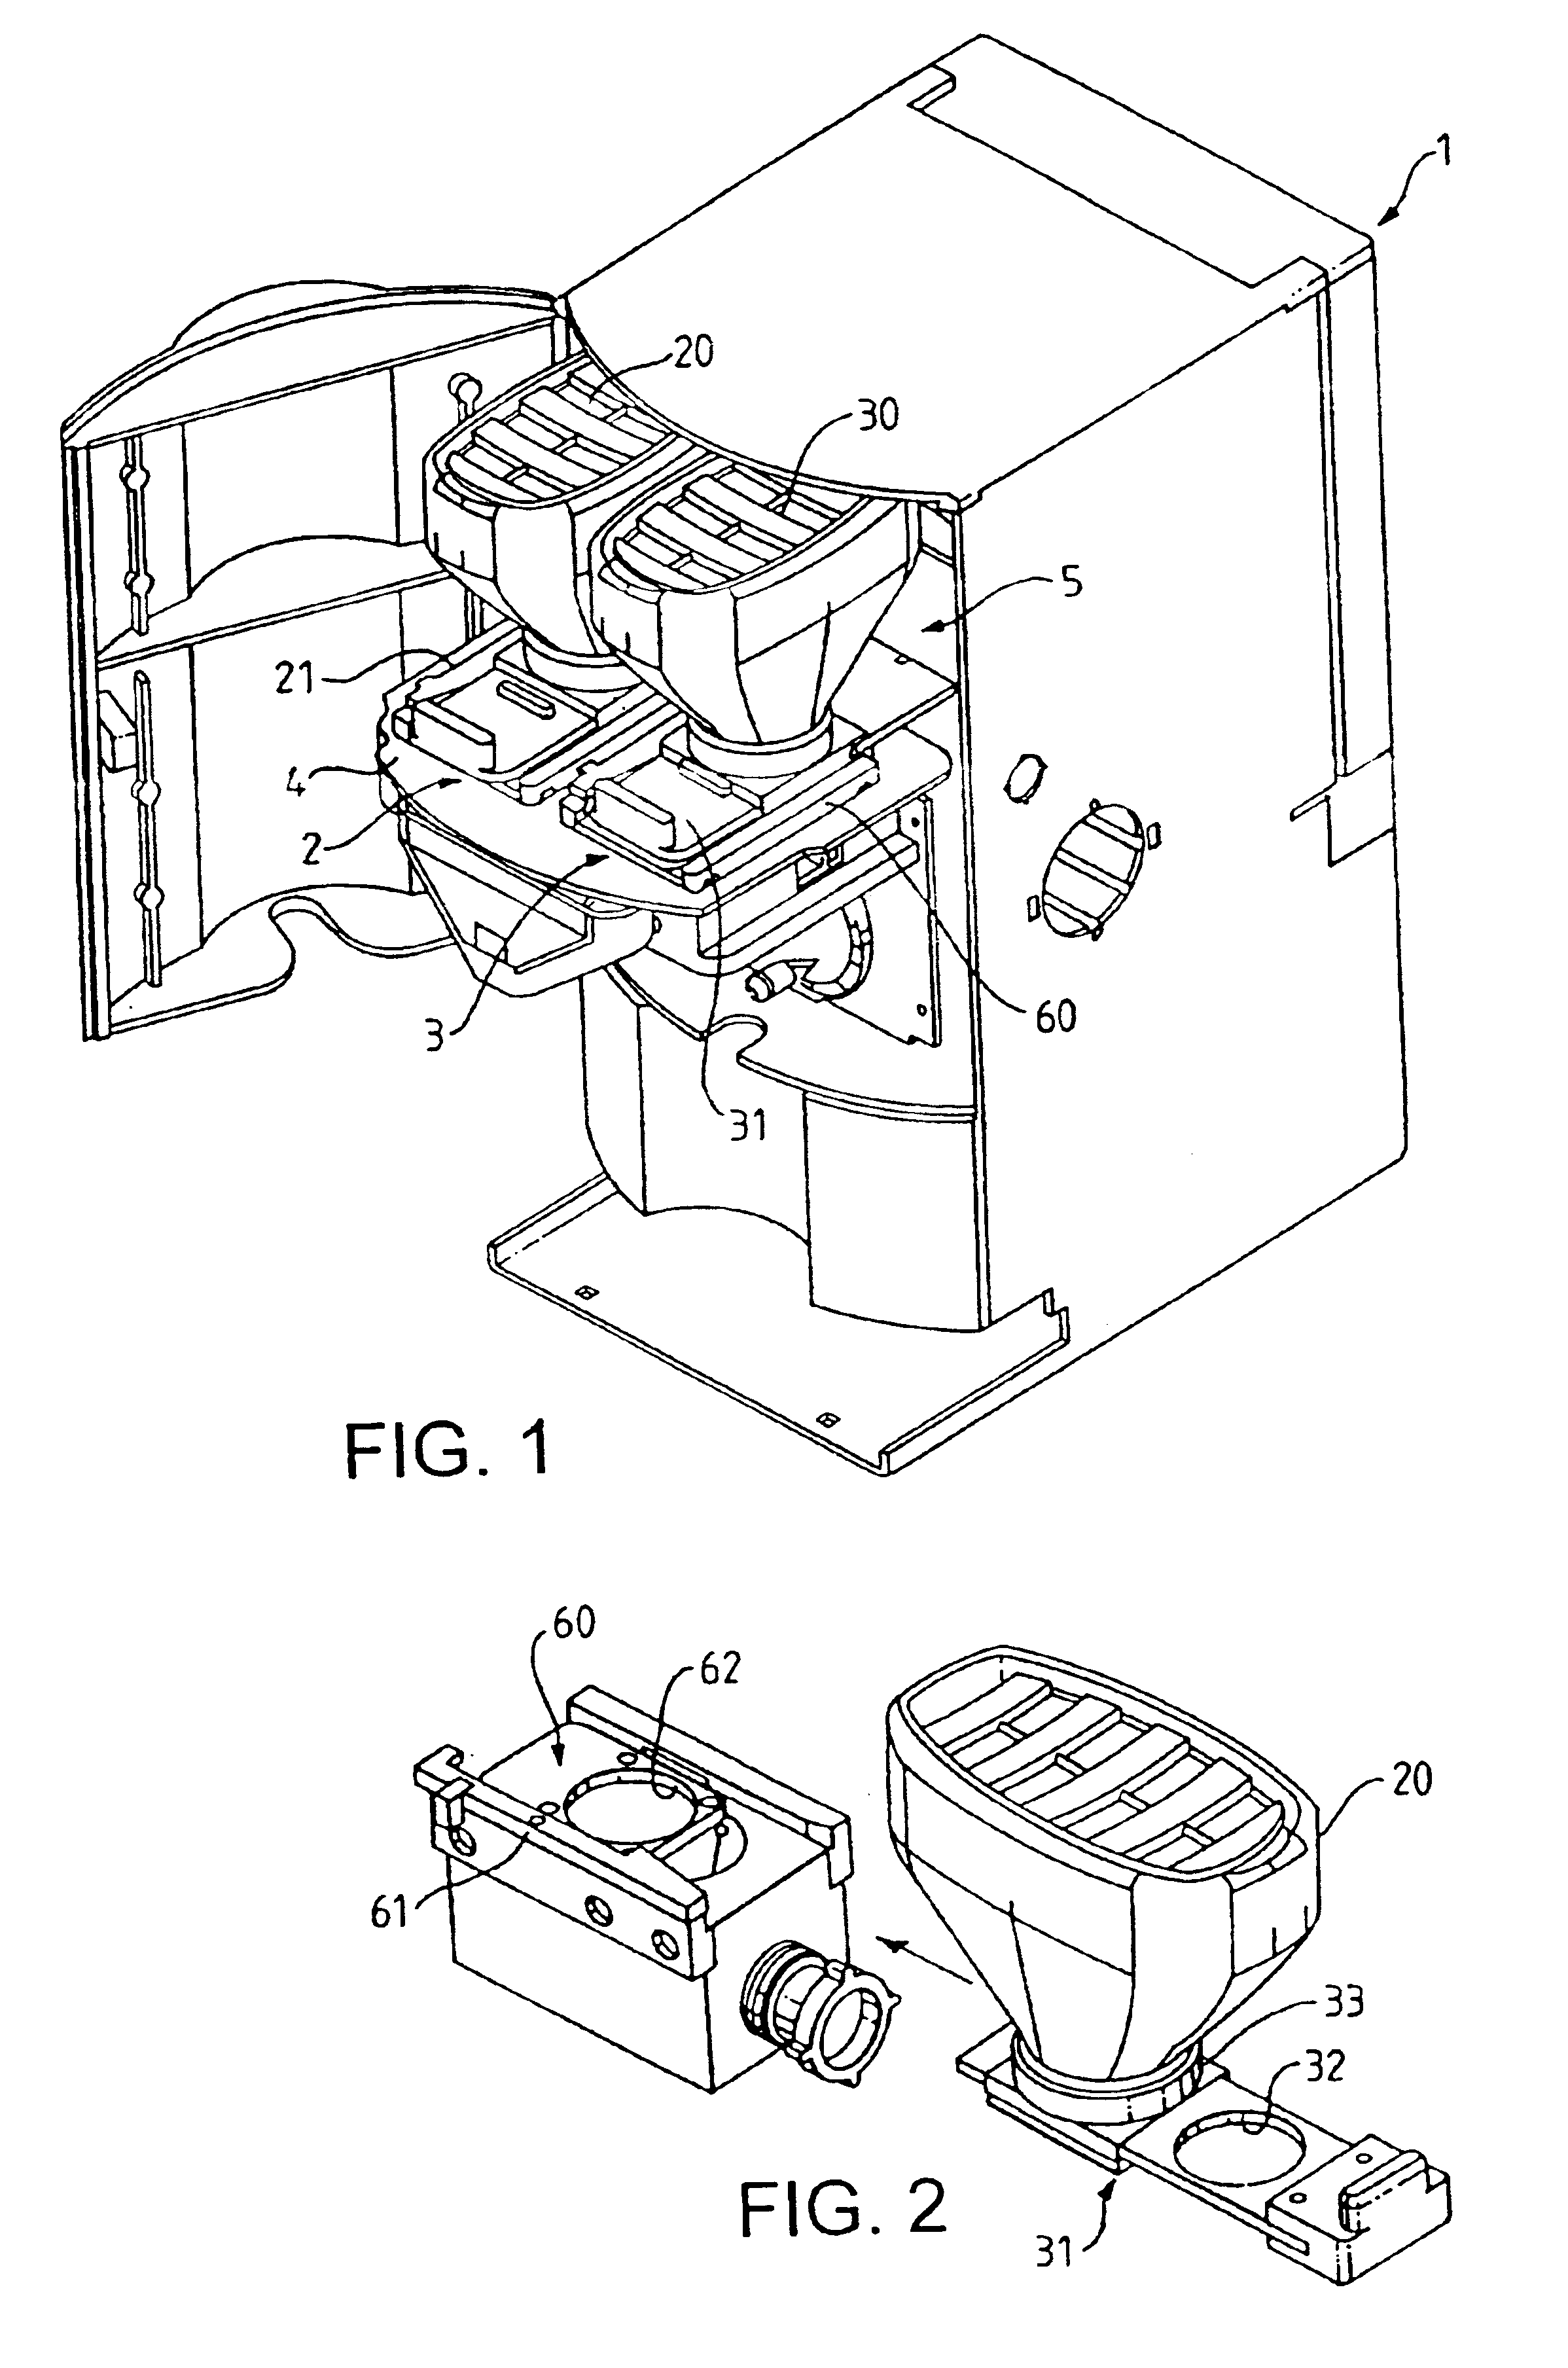 Containers of flowable substance adapted for connecting to dispensing devices of a beverage or food dispensing machine